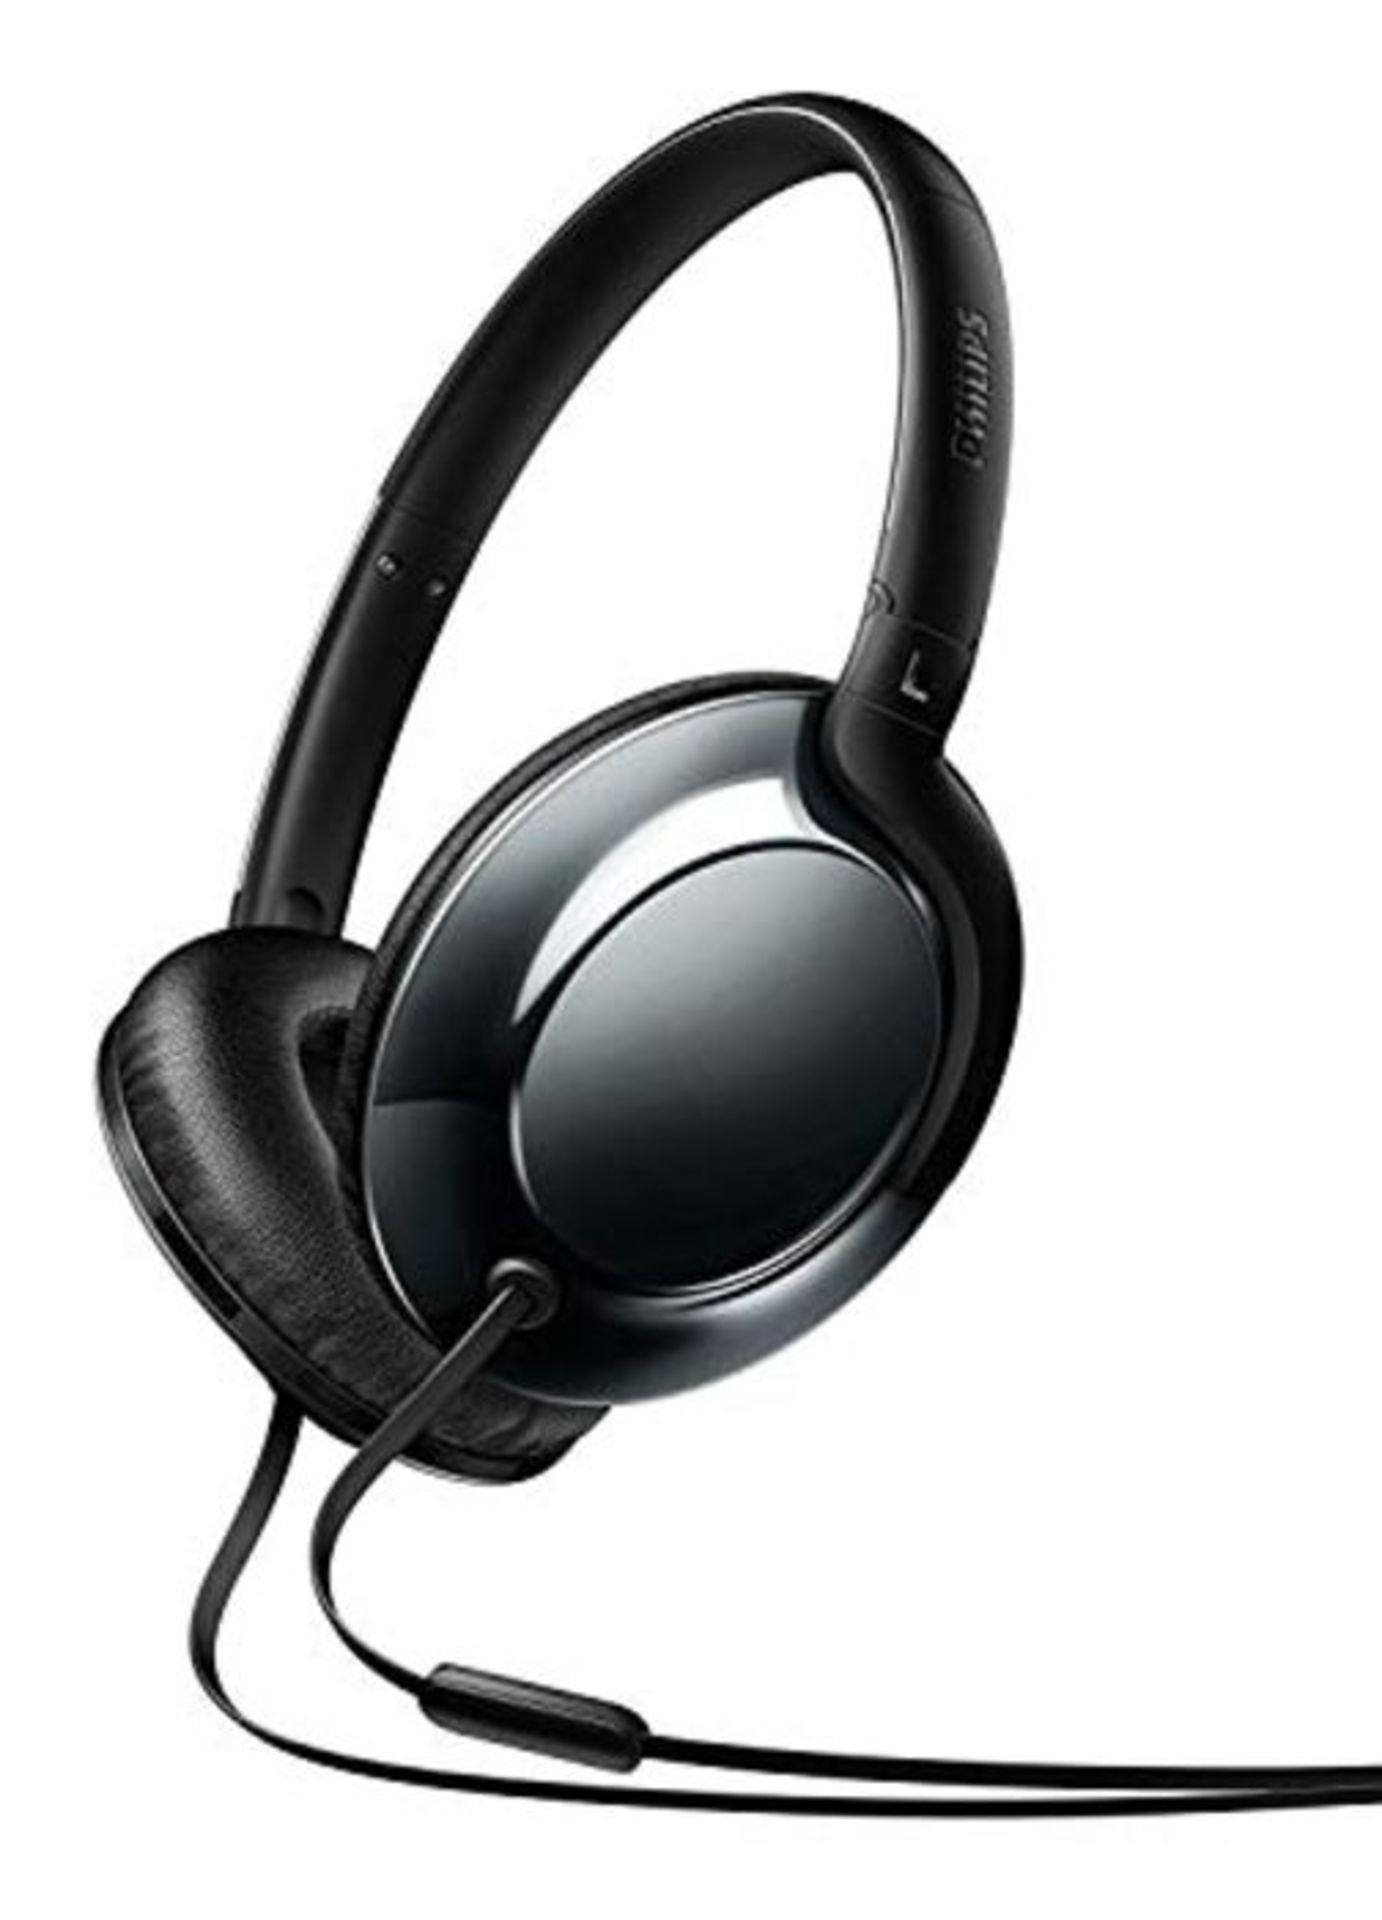 Philips SHL4805DC Flite Everlite Headphone with Microphone and Cable - Black/Grey - Image 3 of 4